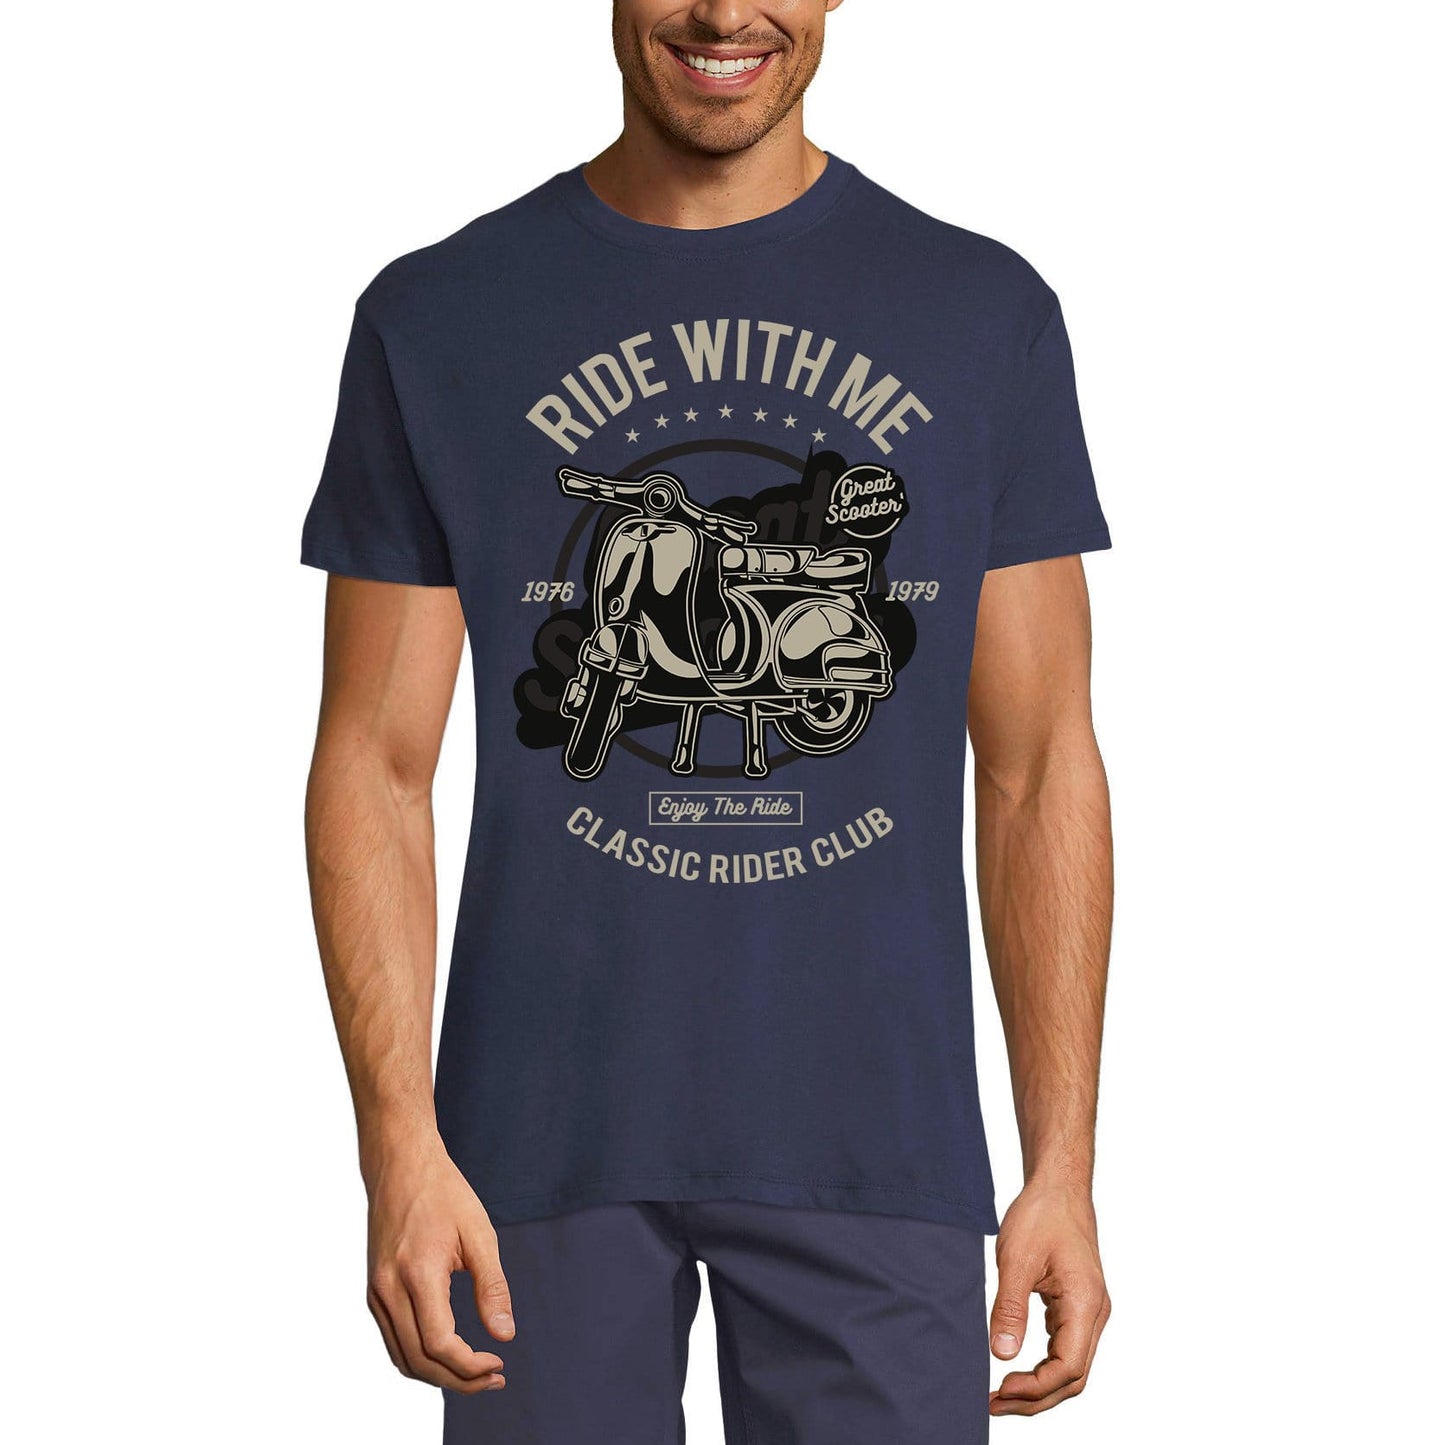 ULTRABASIC Men's Graphic T-Shirt Ride With Me - Classic Rider Club Scooter Tee Shirt